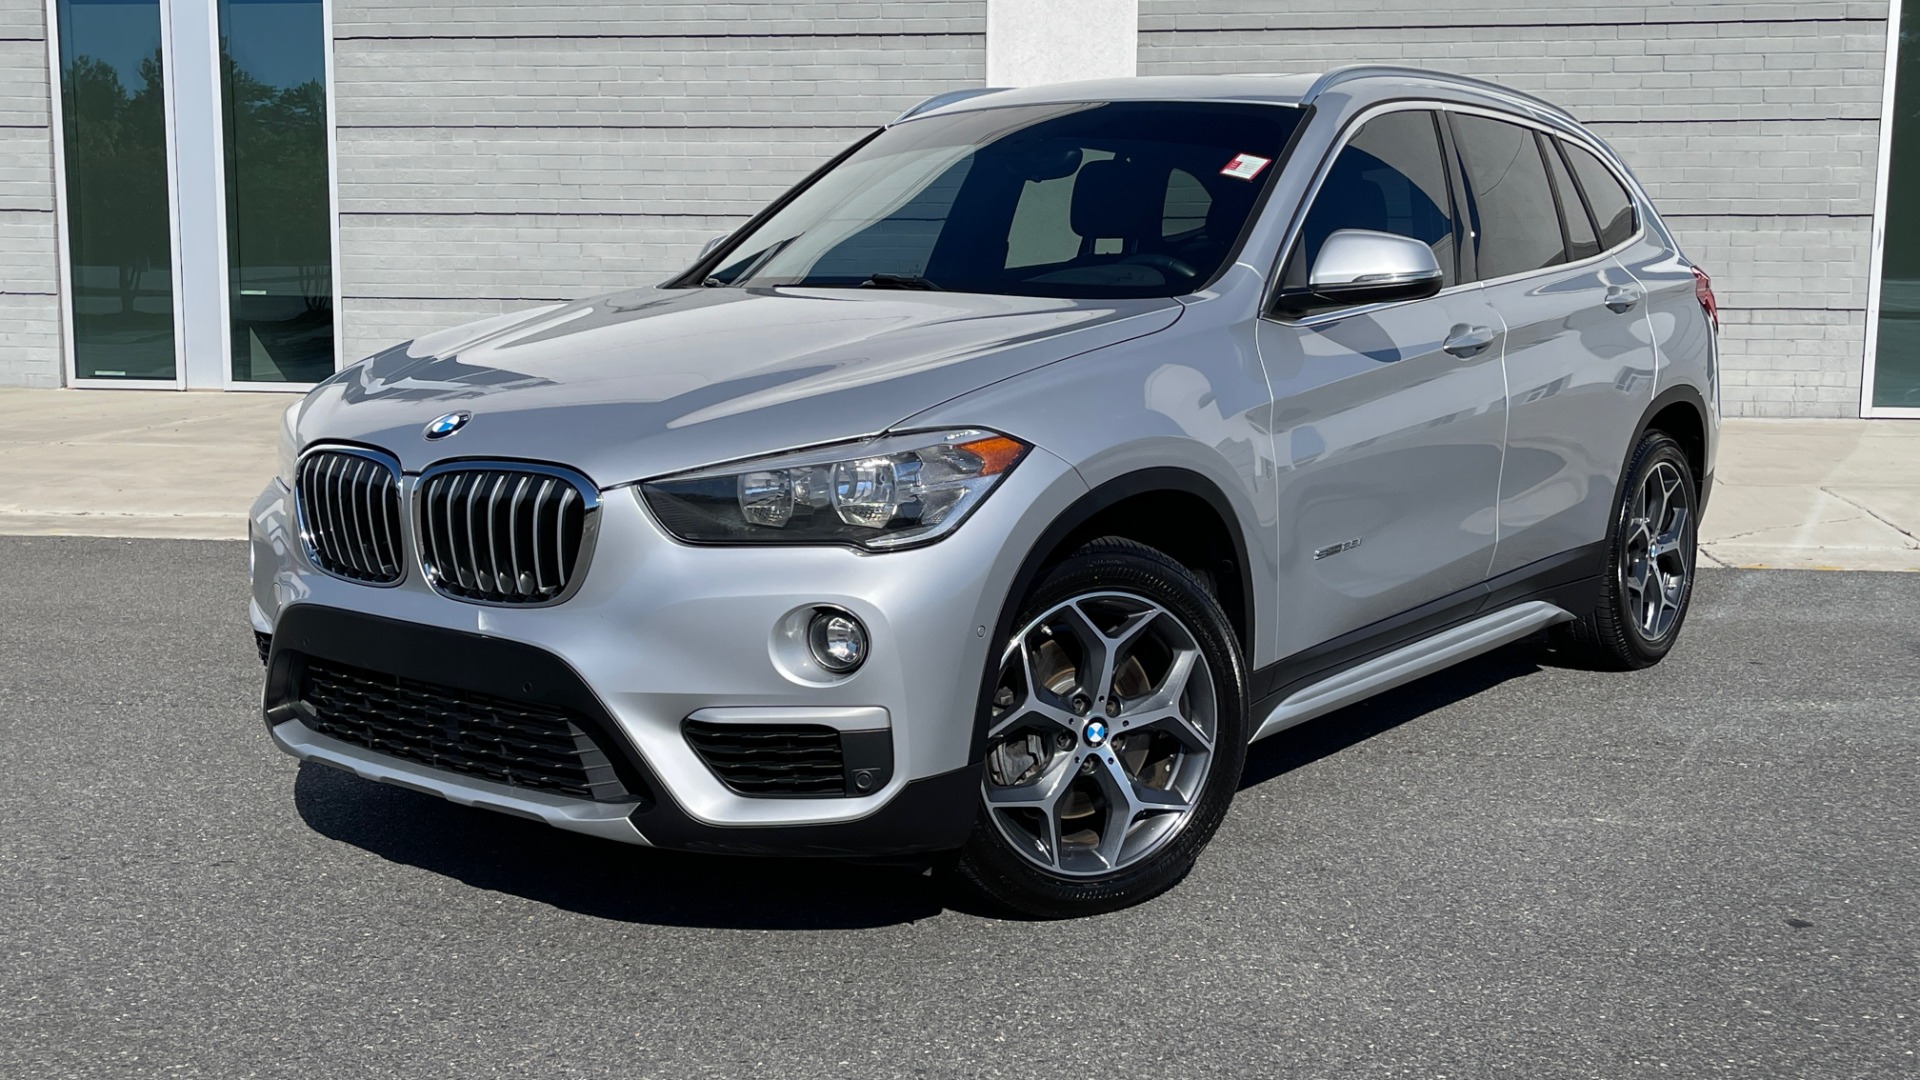 Used 2017 BMW X1 SDRIVE28I 2.0L / DRVR ASST / PARK ASST / PANO-ROOF / REARVIEW for sale Sold at Formula Imports in Charlotte NC 28227 1